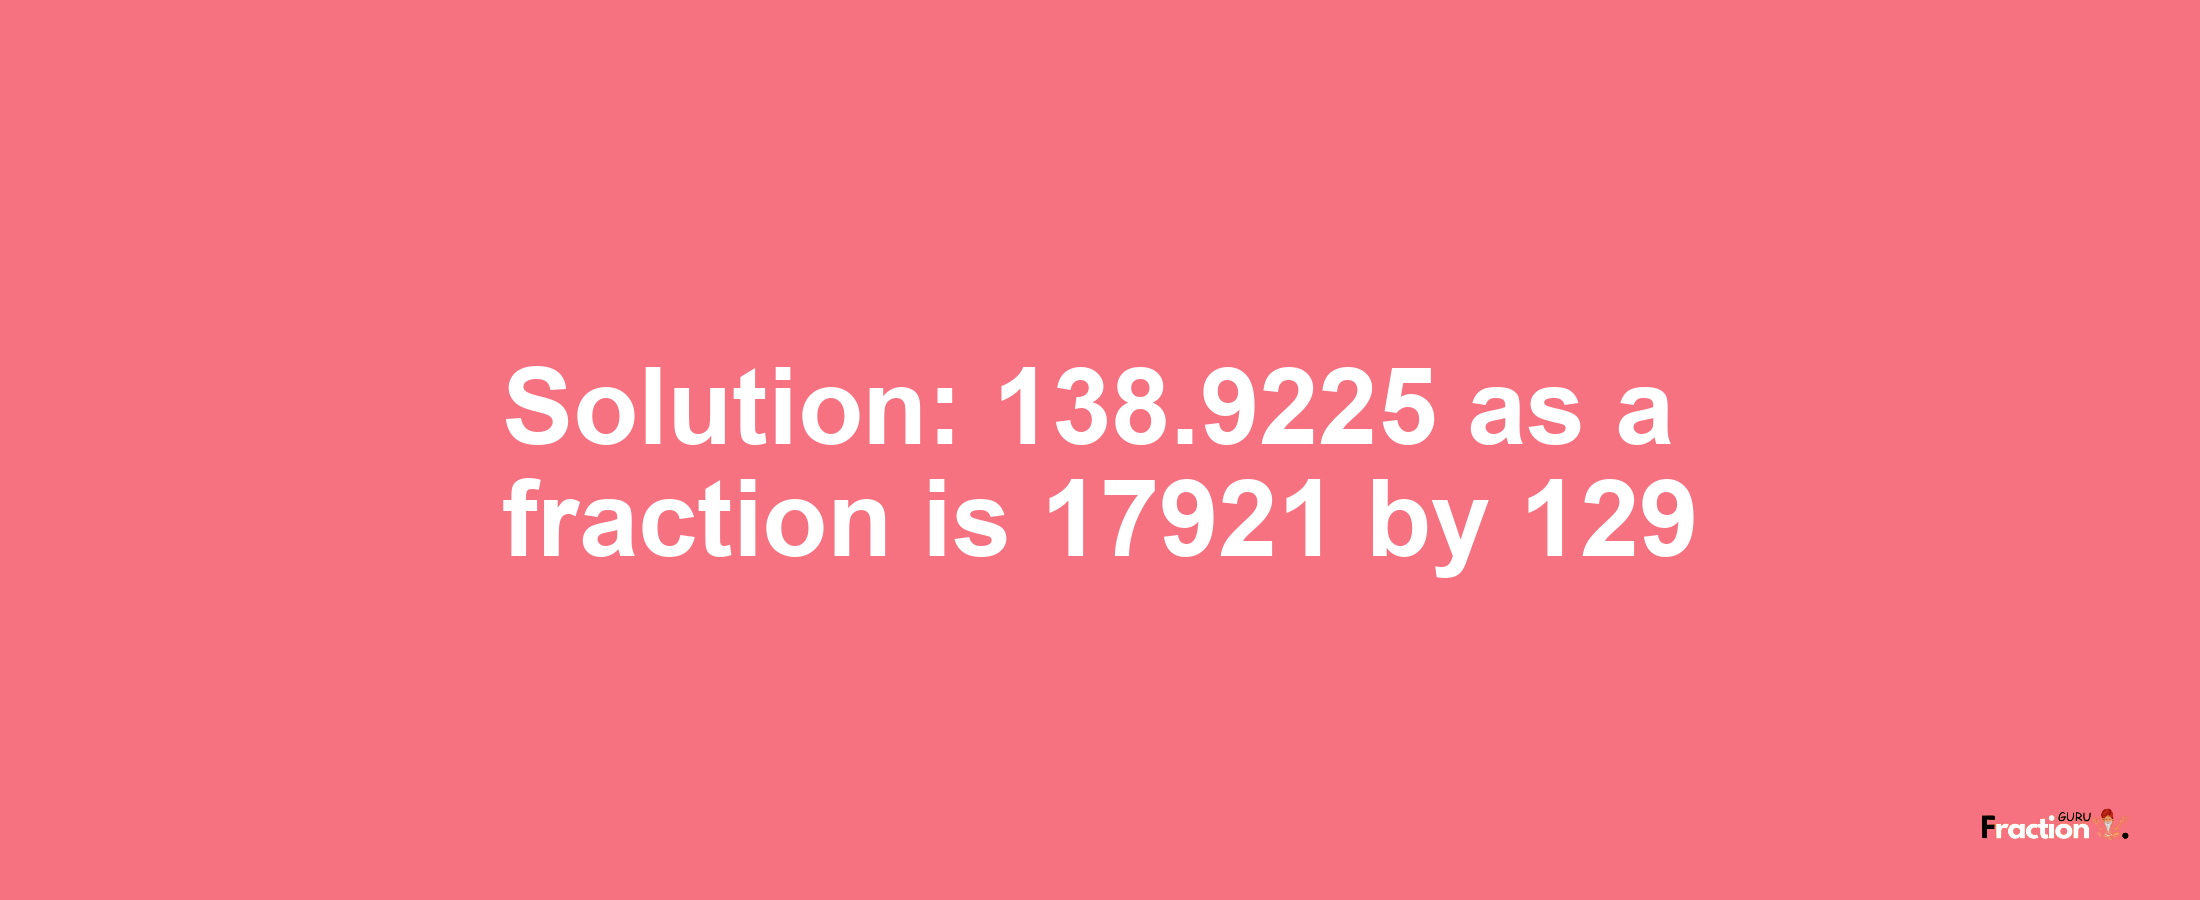 Solution:138.9225 as a fraction is 17921/129